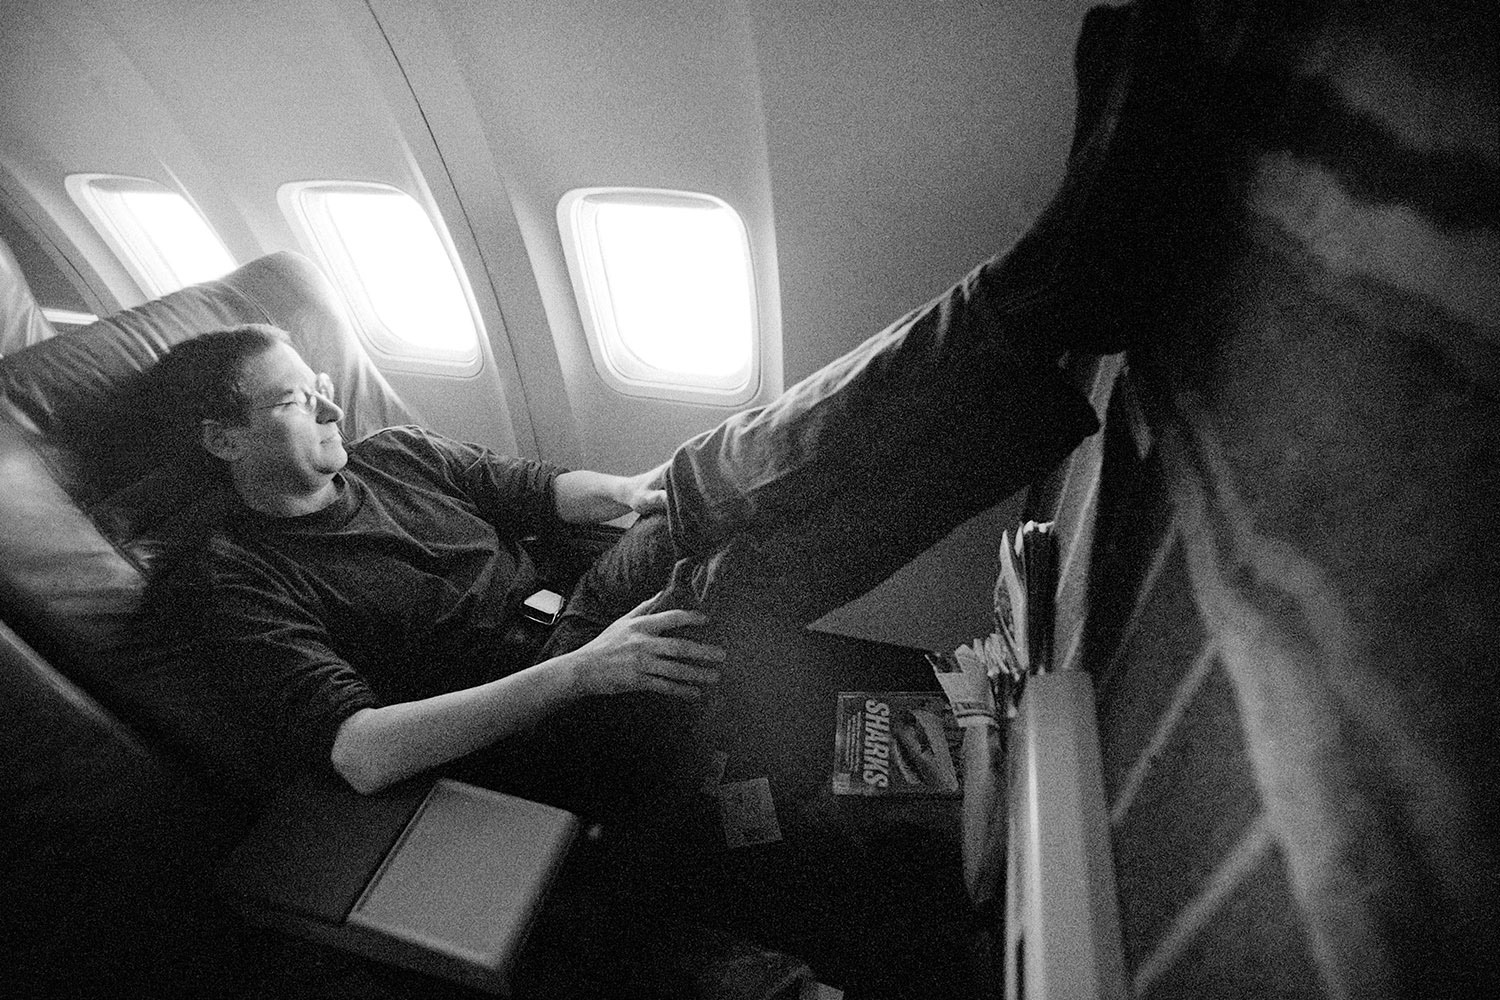 Jobs rests on a flight to the Macworld Expo in Boston in 1997, the year he took back the reins at Apple after a 12-year hiatus.